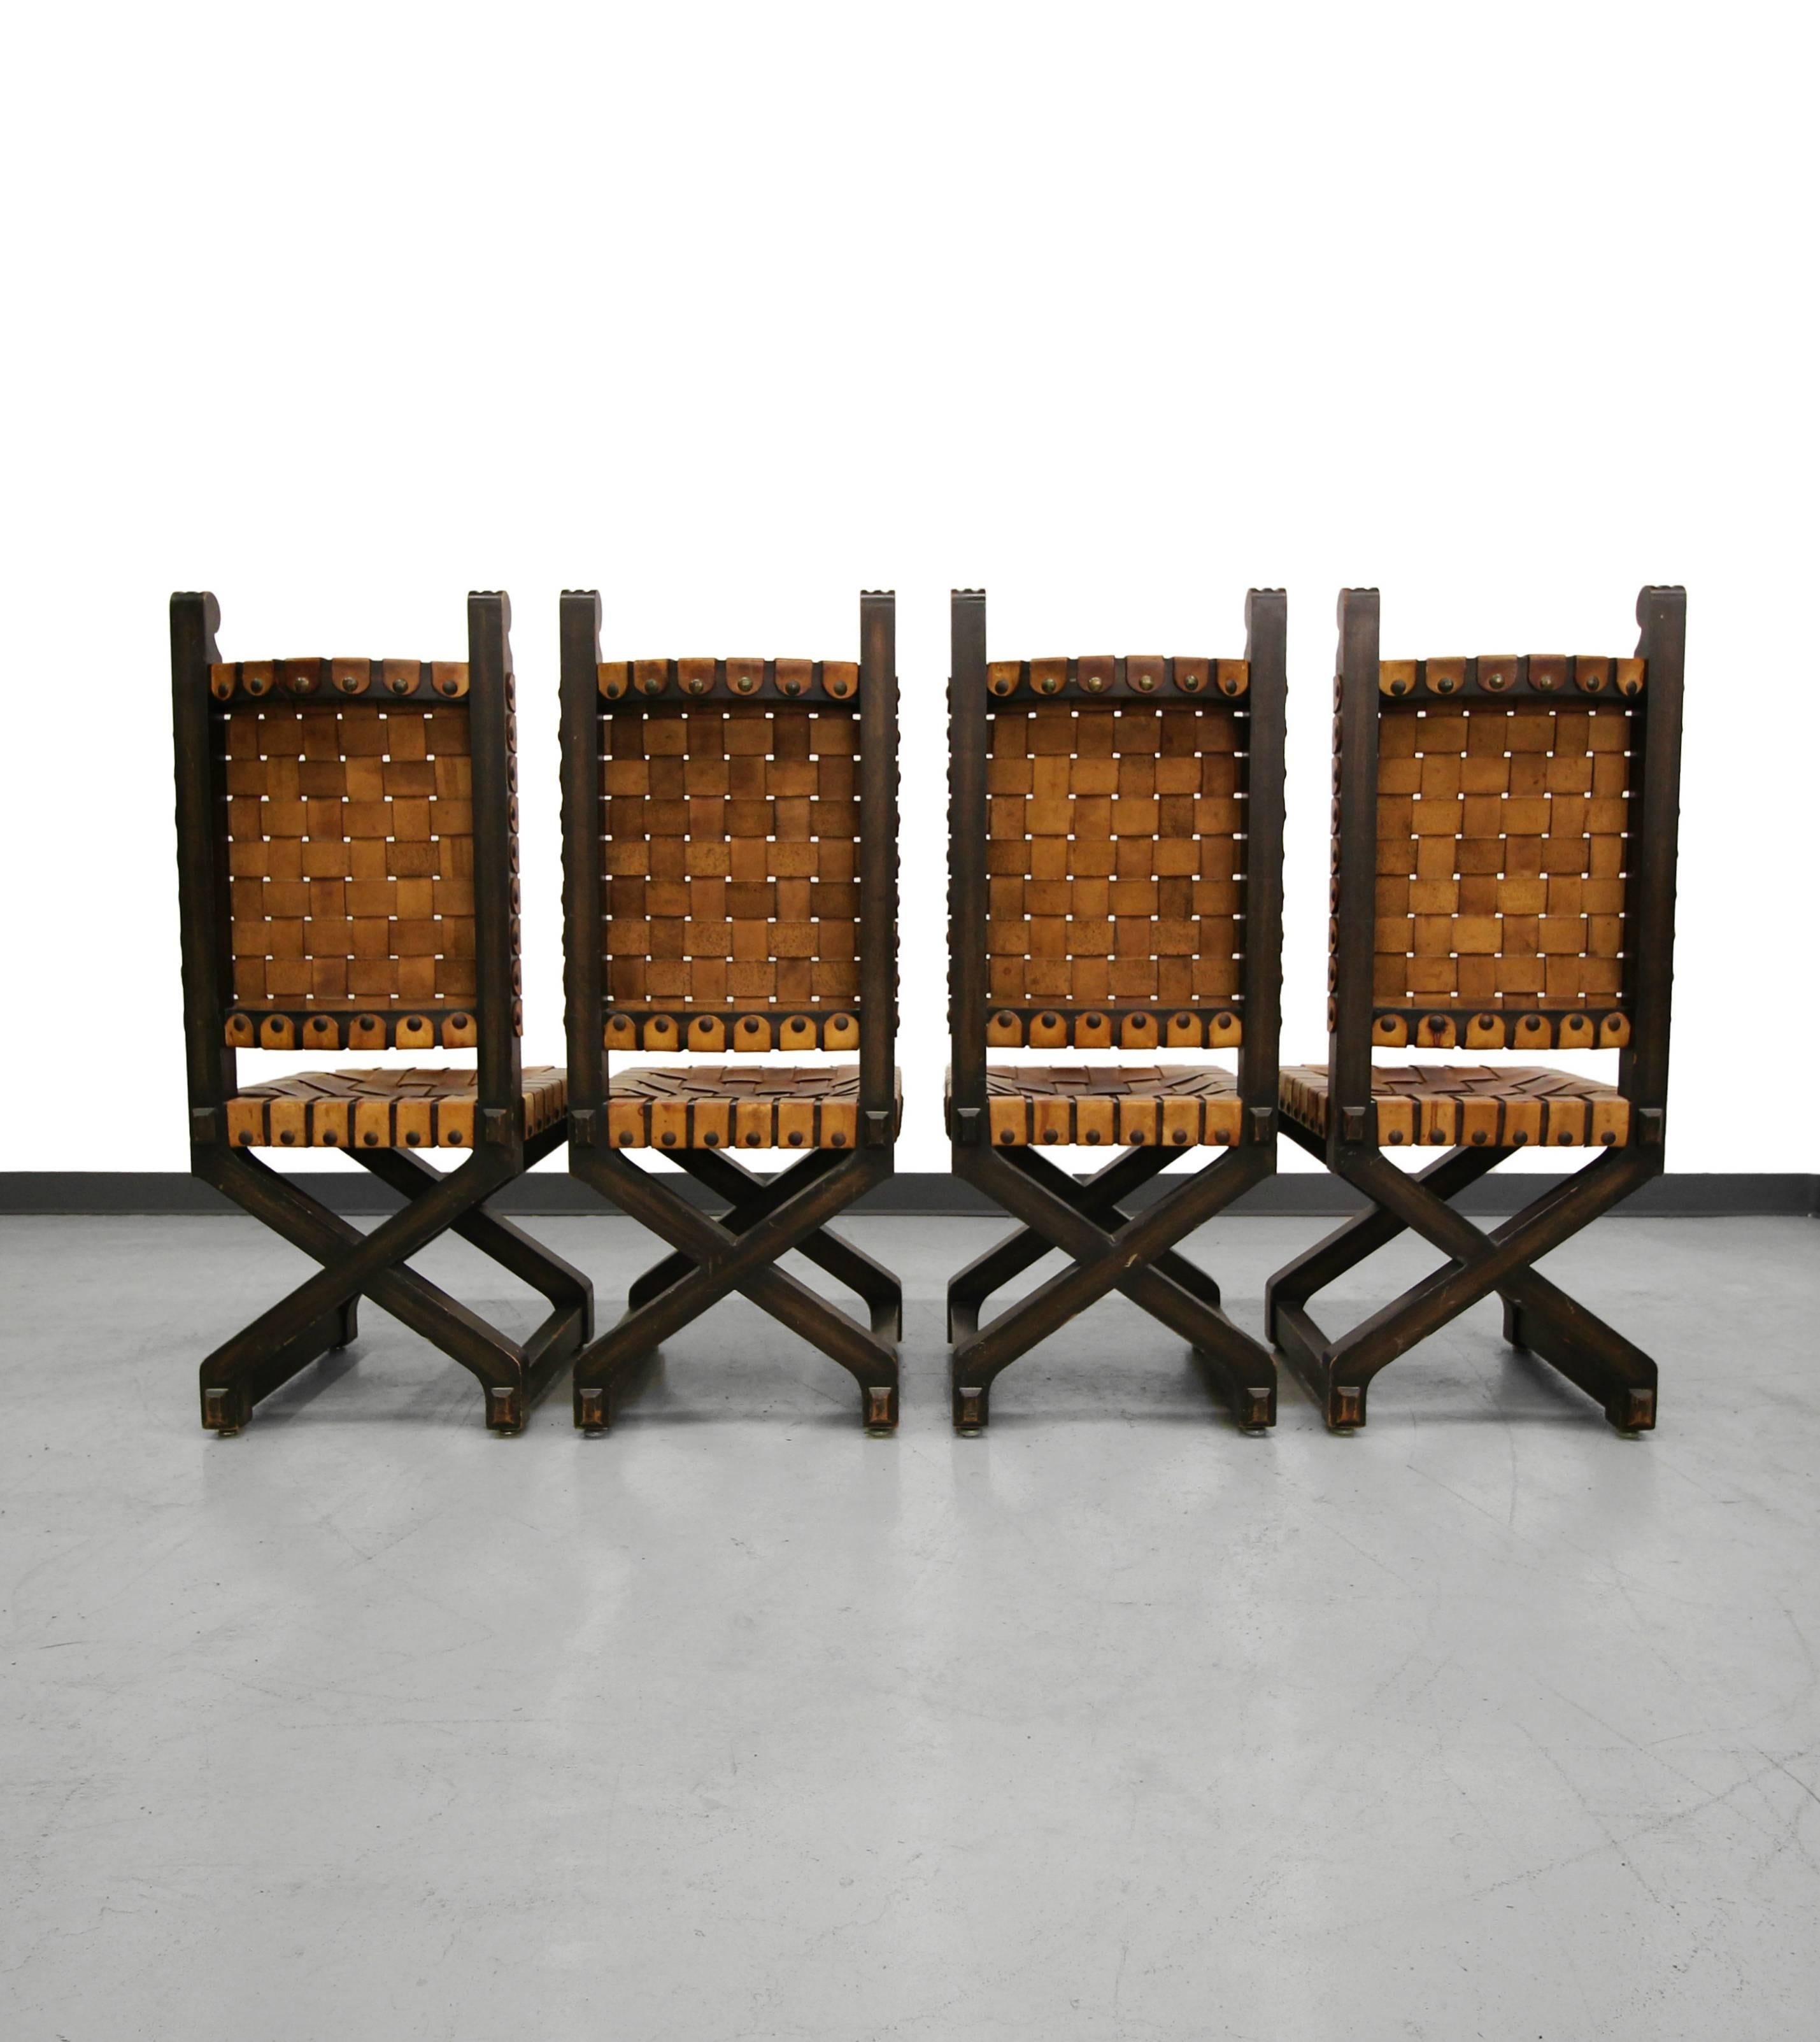 Set of four, perfectly patinated, woven leather, wood frame dining chairs, with large brass nailhead details. They were made in Mexico and are of superior craftsmanship. Chairs have beautifully worn leather for that great Industrial look.